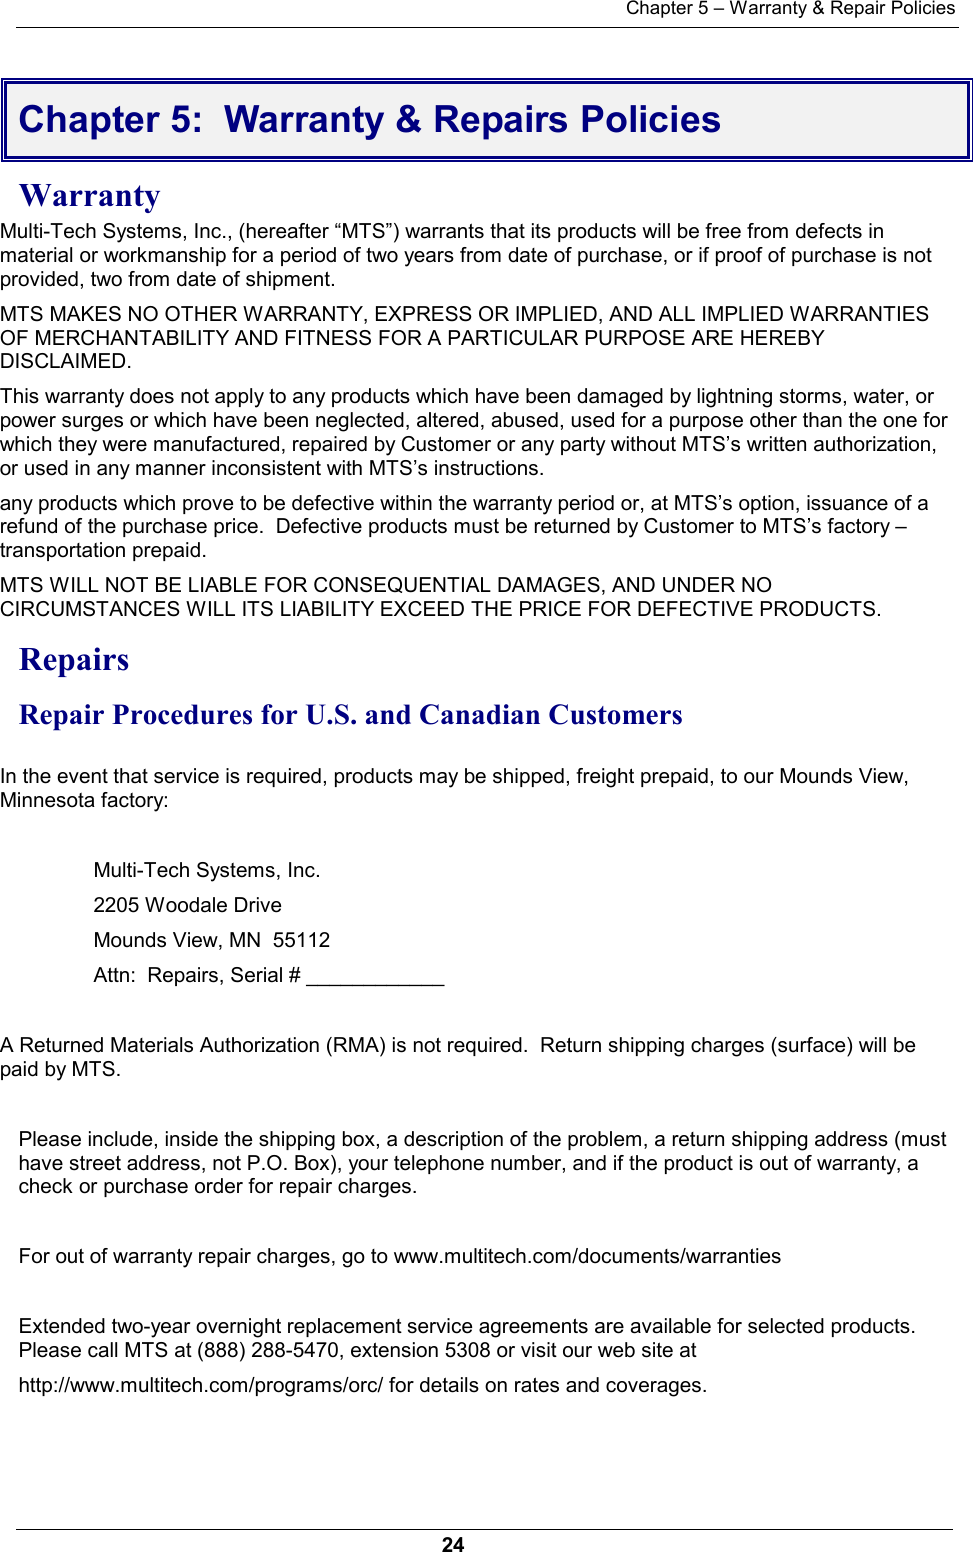 Chapter 5 – Warranty &amp; Repair Policies24Chapter 5:  Warranty &amp; Repairs PoliciesWarrantyMulti-Tech Systems, Inc., (hereafter “MTS”) warrants that its products will be free from defects inmaterial or workmanship for a period of two years from date of purchase, or if proof of purchase is notprovided, two from date of shipment. MTS MAKES NO OTHER WARRANTY, EXPRESS OR IMPLIED, AND ALL IMPLIED WARRANTIESOF MERCHANTABILITY AND FITNESS FOR A PARTICULAR PURPOSE ARE HEREBYDISCLAIMED. This warranty does not apply to any products which have been damaged by lightning storms, water, orpower surges or which have been neglected, altered, abused, used for a purpose other than the one forwhich they were manufactured, repaired by Customer or any party without MTS’s written authorization,or used in any manner inconsistent with MTS’s instructions. any products which prove to be defective within the warranty period or, at MTS’s option, issuance of arefund of the purchase price.  Defective products must be returned by Customer to MTS’s factory –transportation prepaid. MTS WILL NOT BE LIABLE FOR CONSEQUENTIAL DAMAGES, AND UNDER NOCIRCUMSTANCES WILL ITS LIABILITY EXCEED THE PRICE FOR DEFECTIVE PRODUCTS.Repairs Repair Procedures for U.S. and Canadian CustomersIn the event that service is required, products may be shipped, freight prepaid, to our Mounds View,Minnesota factory:  Multi-Tech Systems, Inc.2205 Woodale DriveMounds View, MN  55112Attn:  Repairs, Serial # ____________A Returned Materials Authorization (RMA) is not required.  Return shipping charges (surface) will bepaid by MTS. Please include, inside the shipping box, a description of the problem, a return shipping address (musthave street address, not P.O. Box), your telephone number, and if the product is out of warranty, acheck or purchase order for repair charges. For out of warranty repair charges, go to www.multitech.com/documents/warrantiesExtended two-year overnight replacement service agreements are available for selected products.Please call MTS at (888) 288-5470, extension 5308 or visit our web site at http://www.multitech.com/programs/orc/ for details on rates and coverages. 